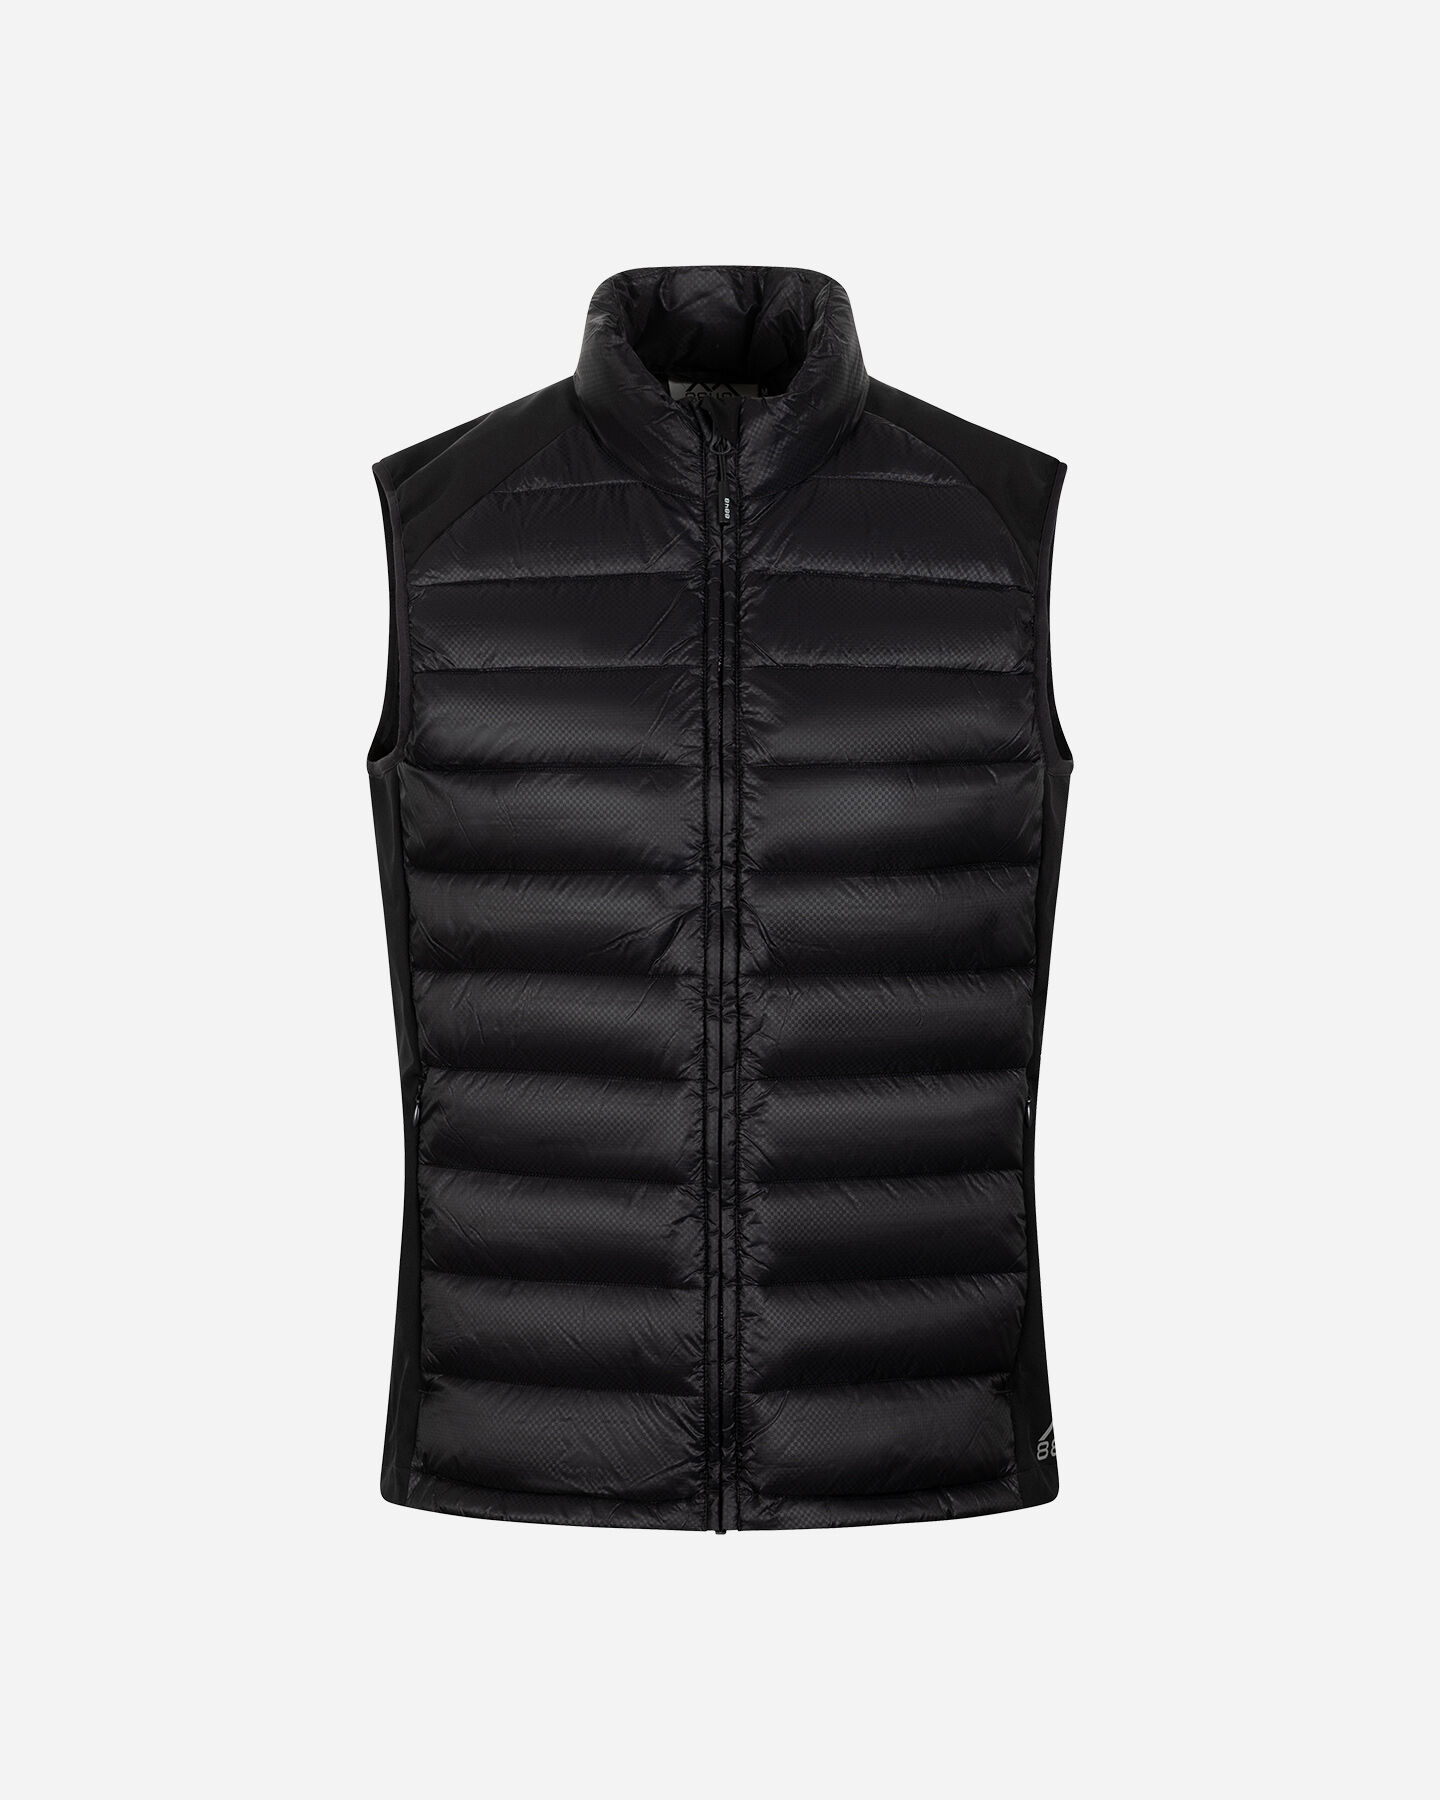  Gilet 8848 MOUNTAIN HIKE M S4131203|995|S scatto 5